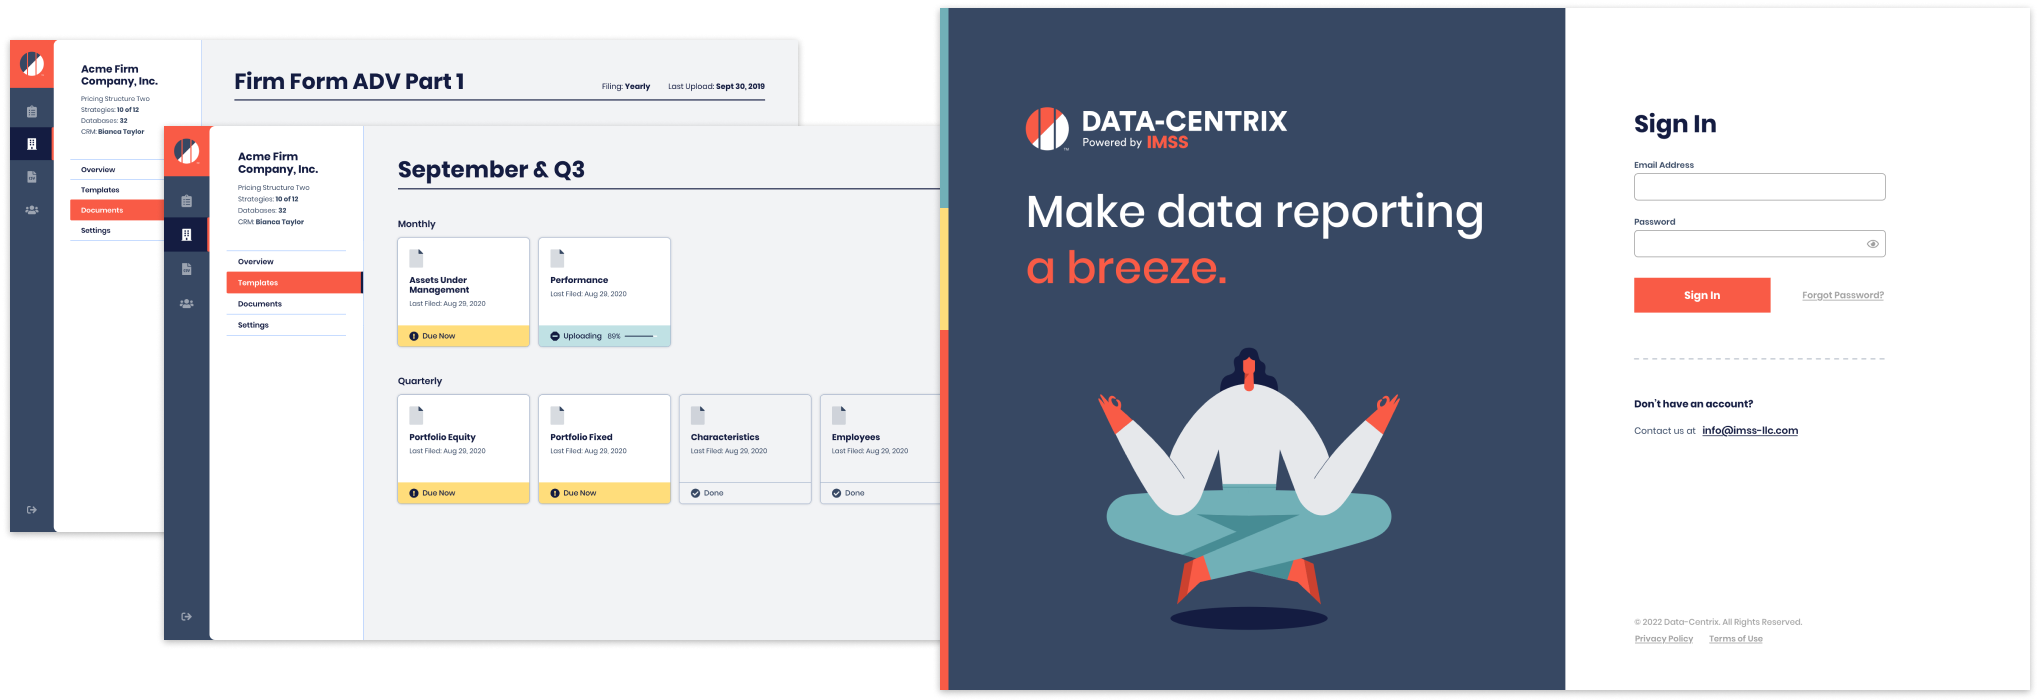 Sample screens of the Data-Centrix application